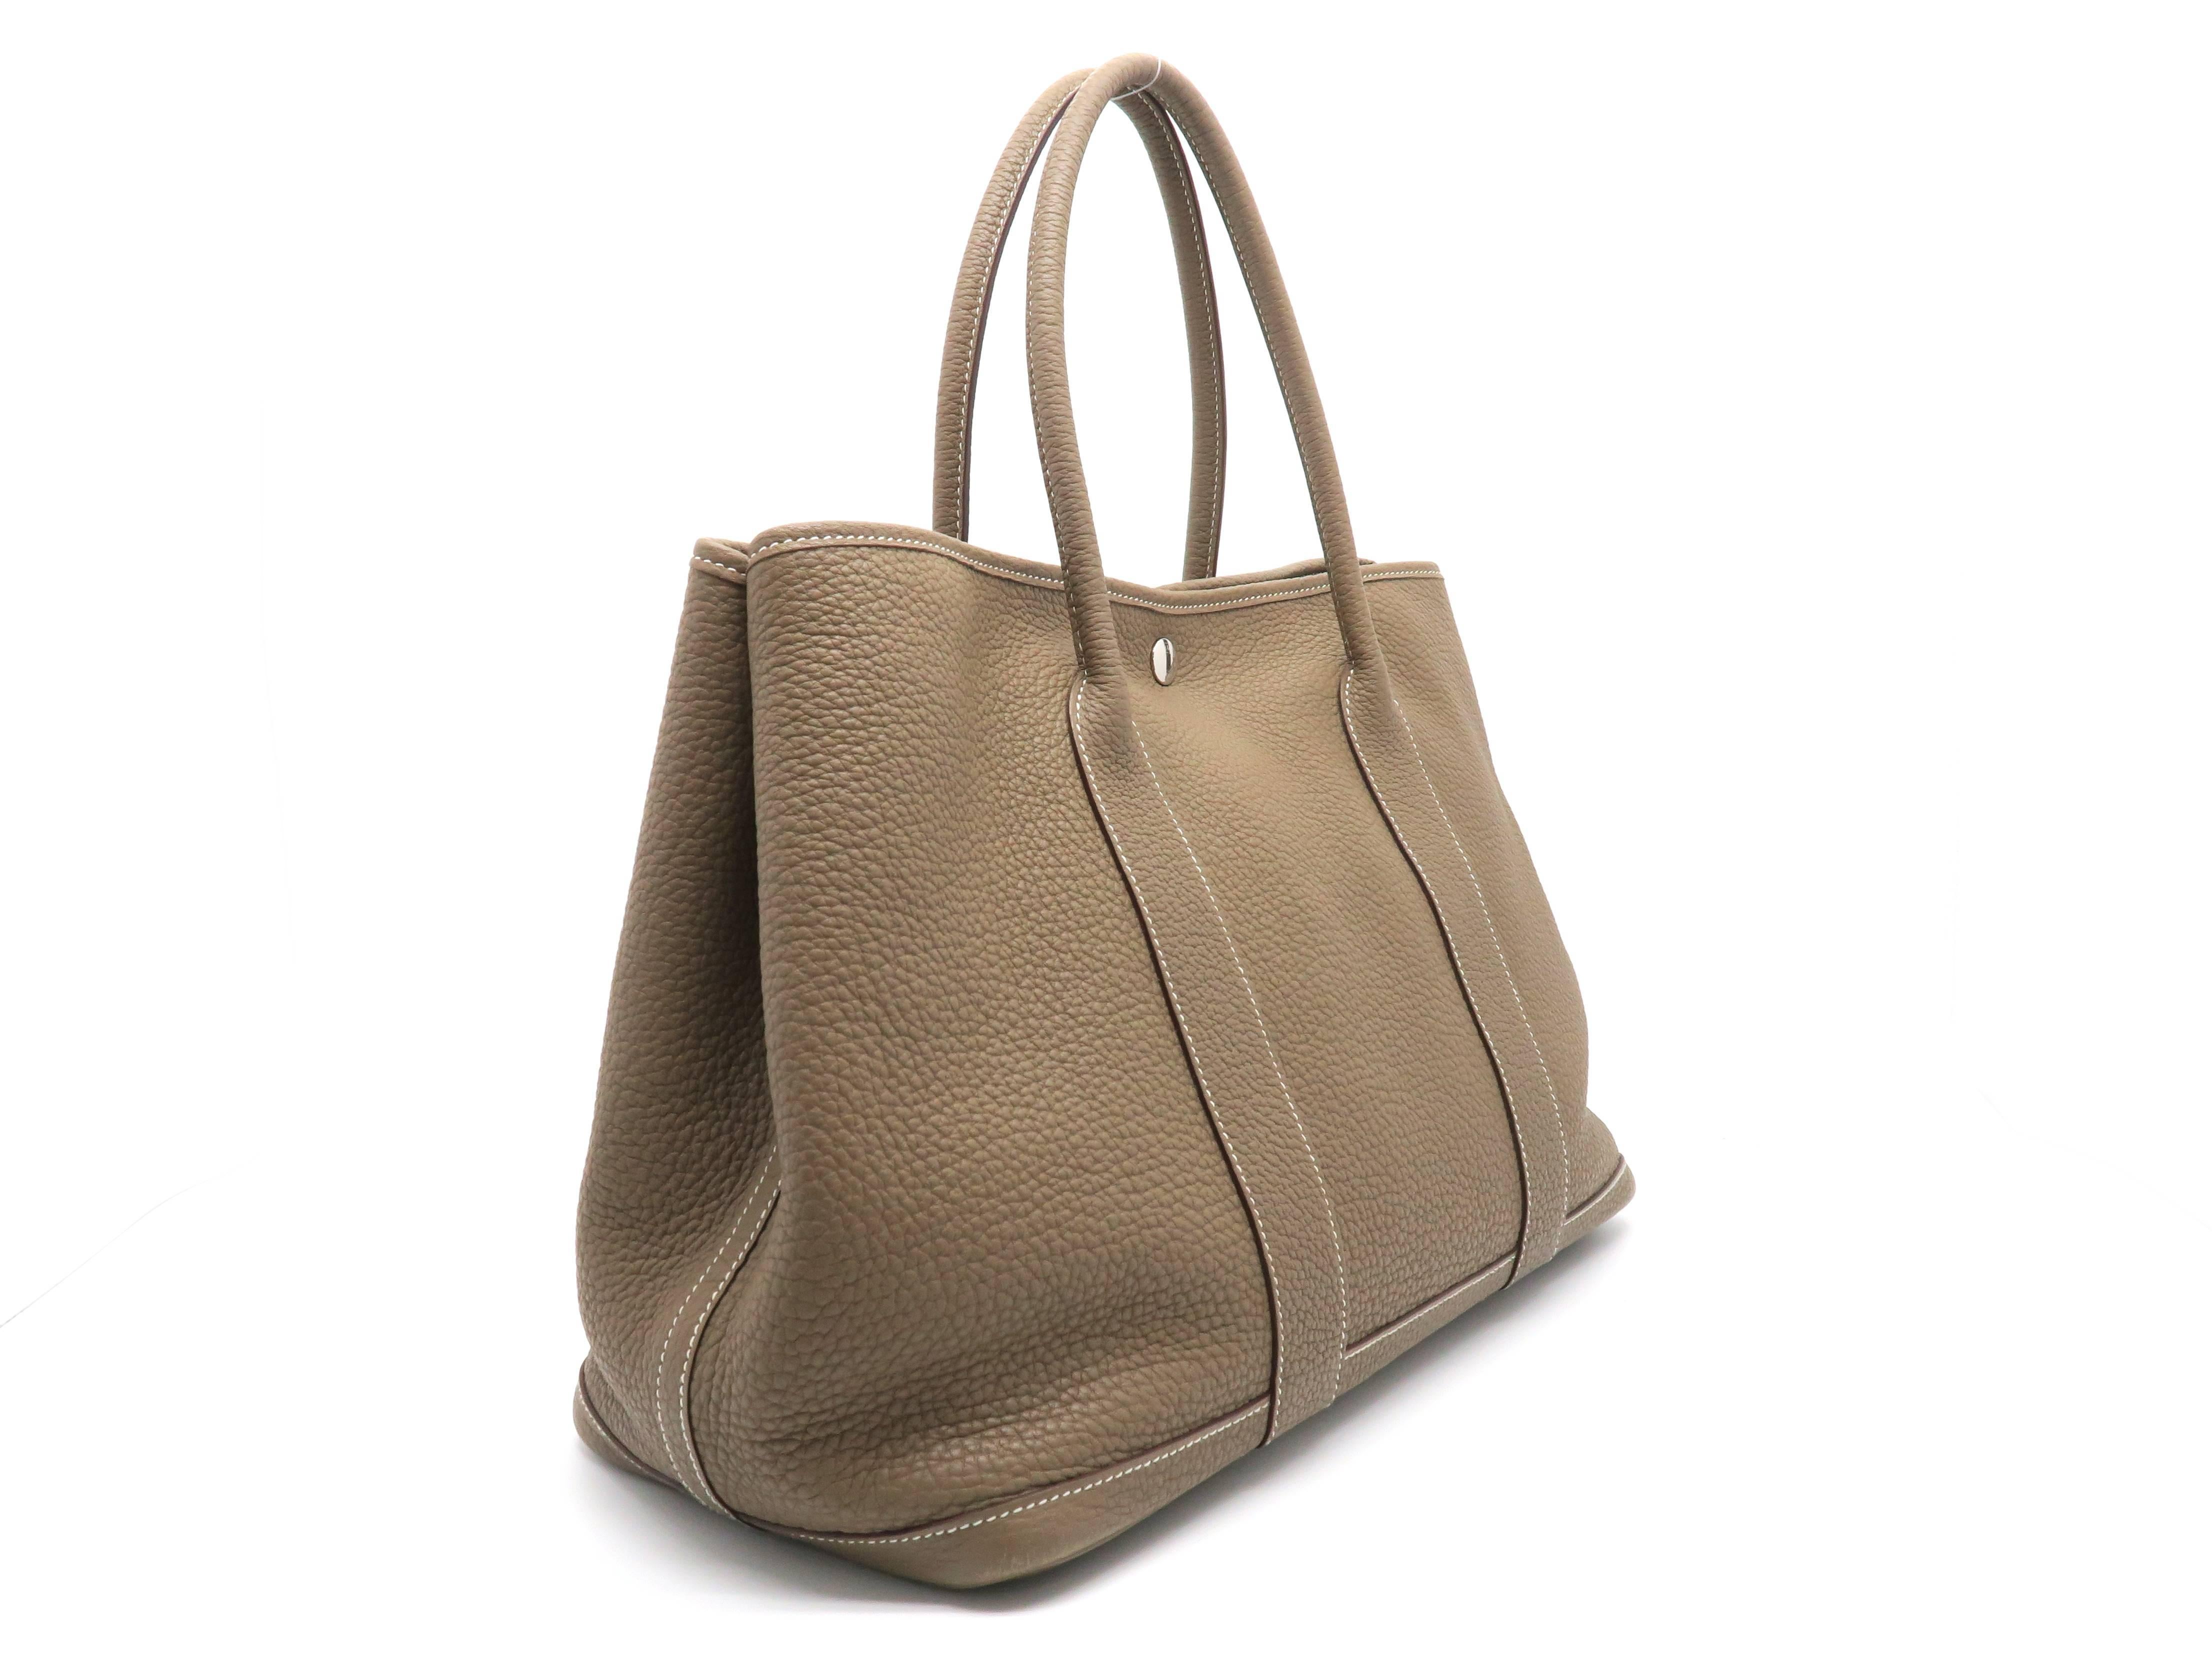 Color: Etoupe (designer color)

Material: Taurillon Clemence Leather

Condition: Rank A
Overall: Good, few minor defects
Surface: Good
Corners: Minor Scratches 
Edges: Good
Handles/Straps: Good
Hardware: Good

Dimensions: W36 × H26 ×